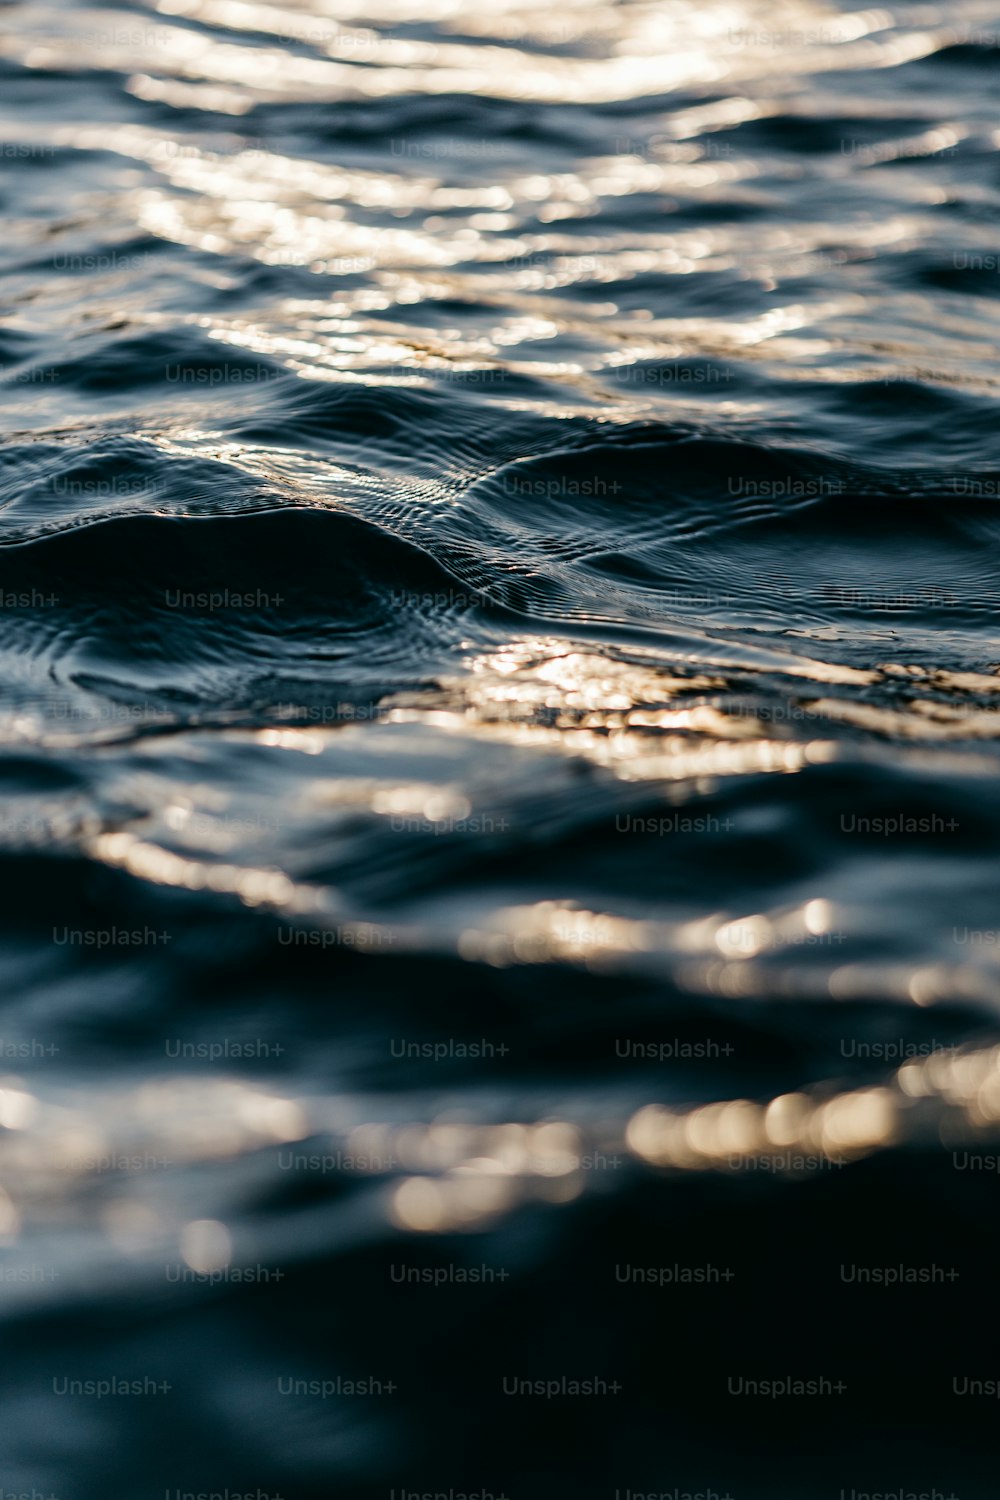 a close up of a body of water with waves